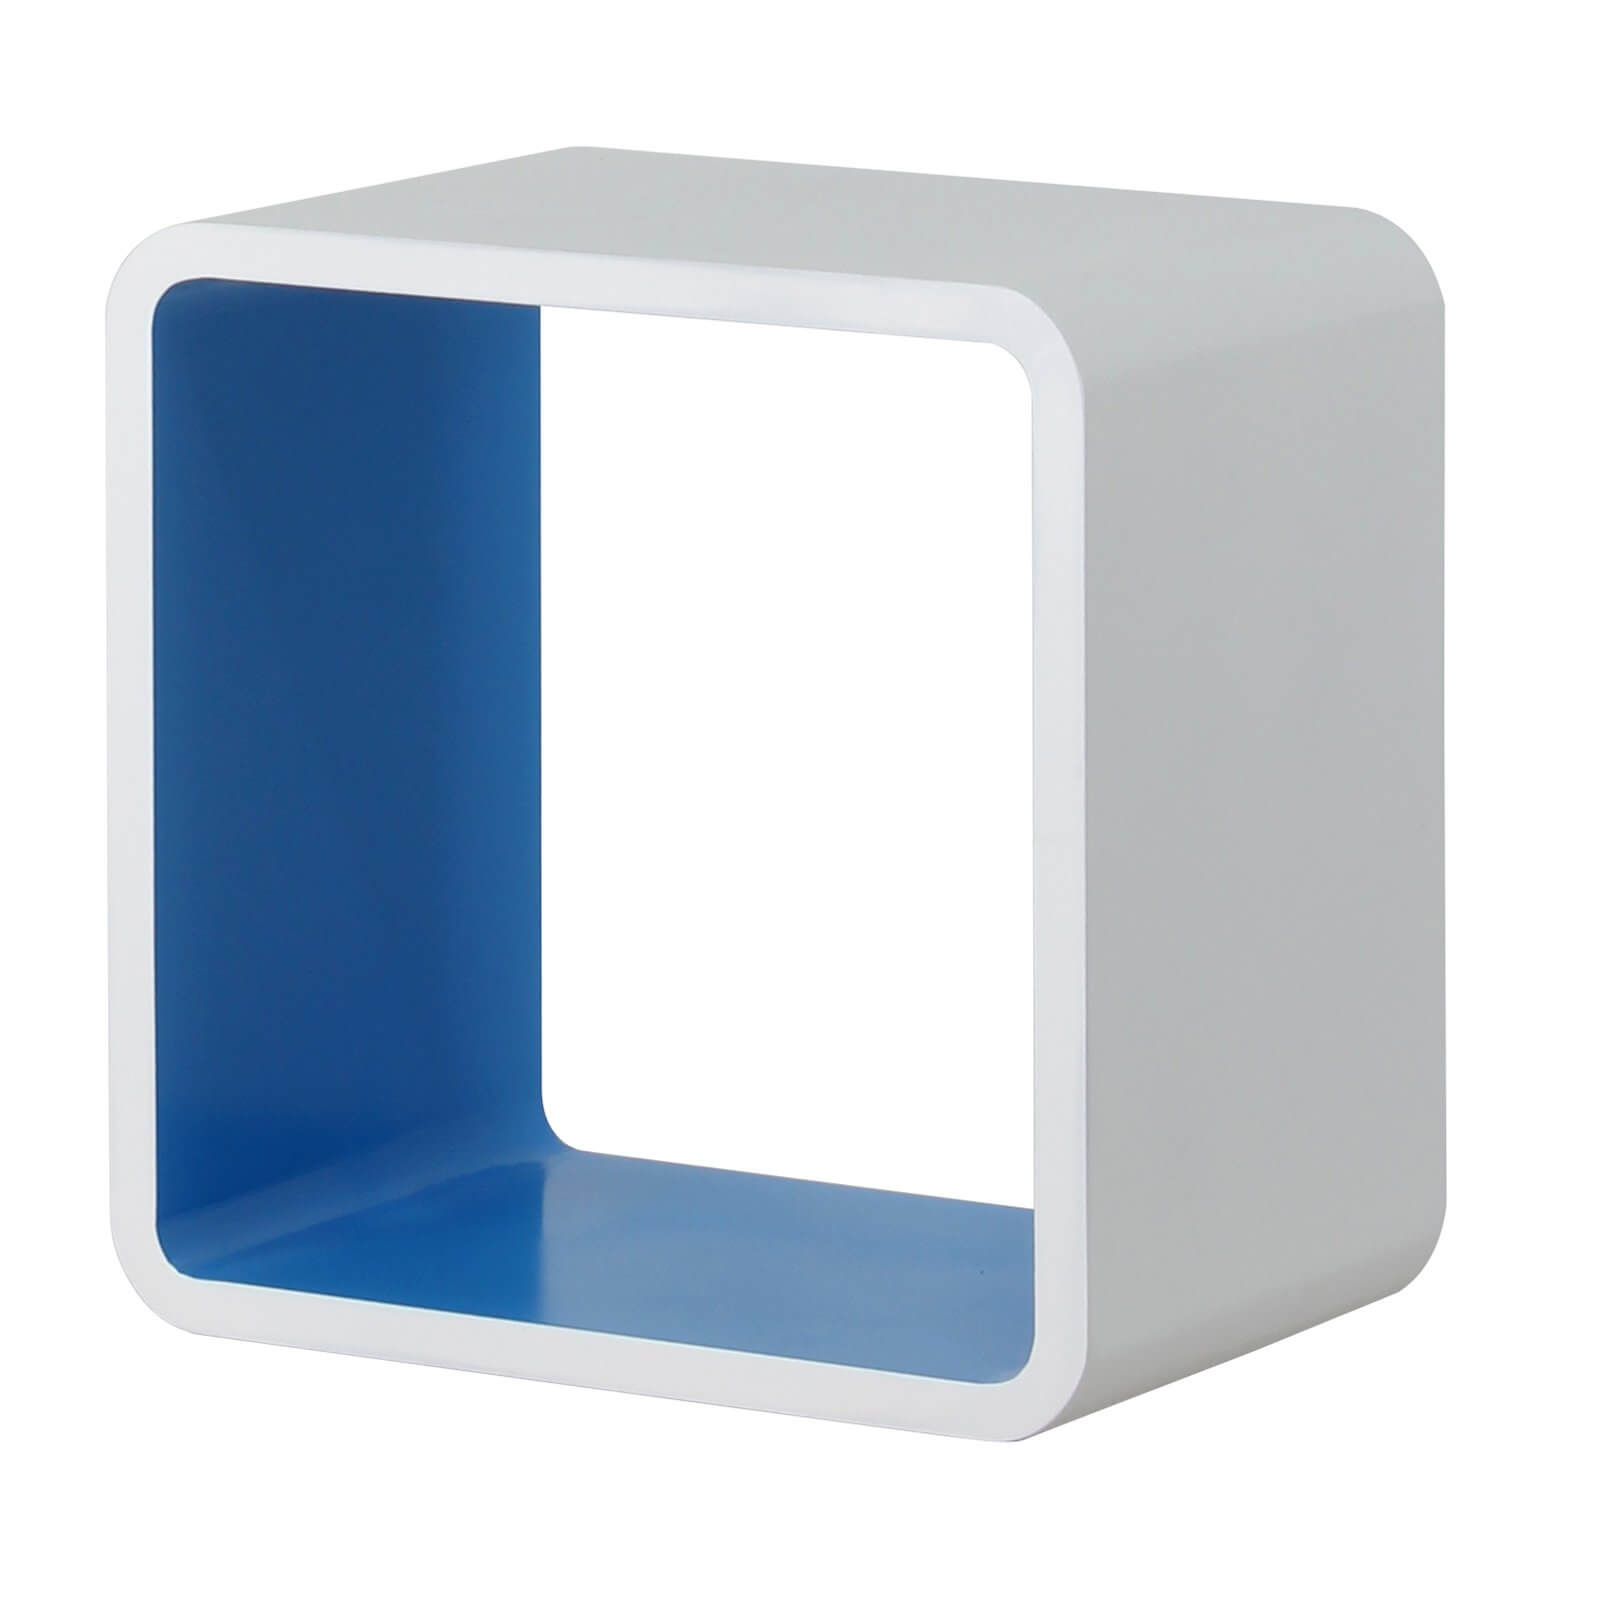 Photo of Cube Wall Shelf - White And Blue